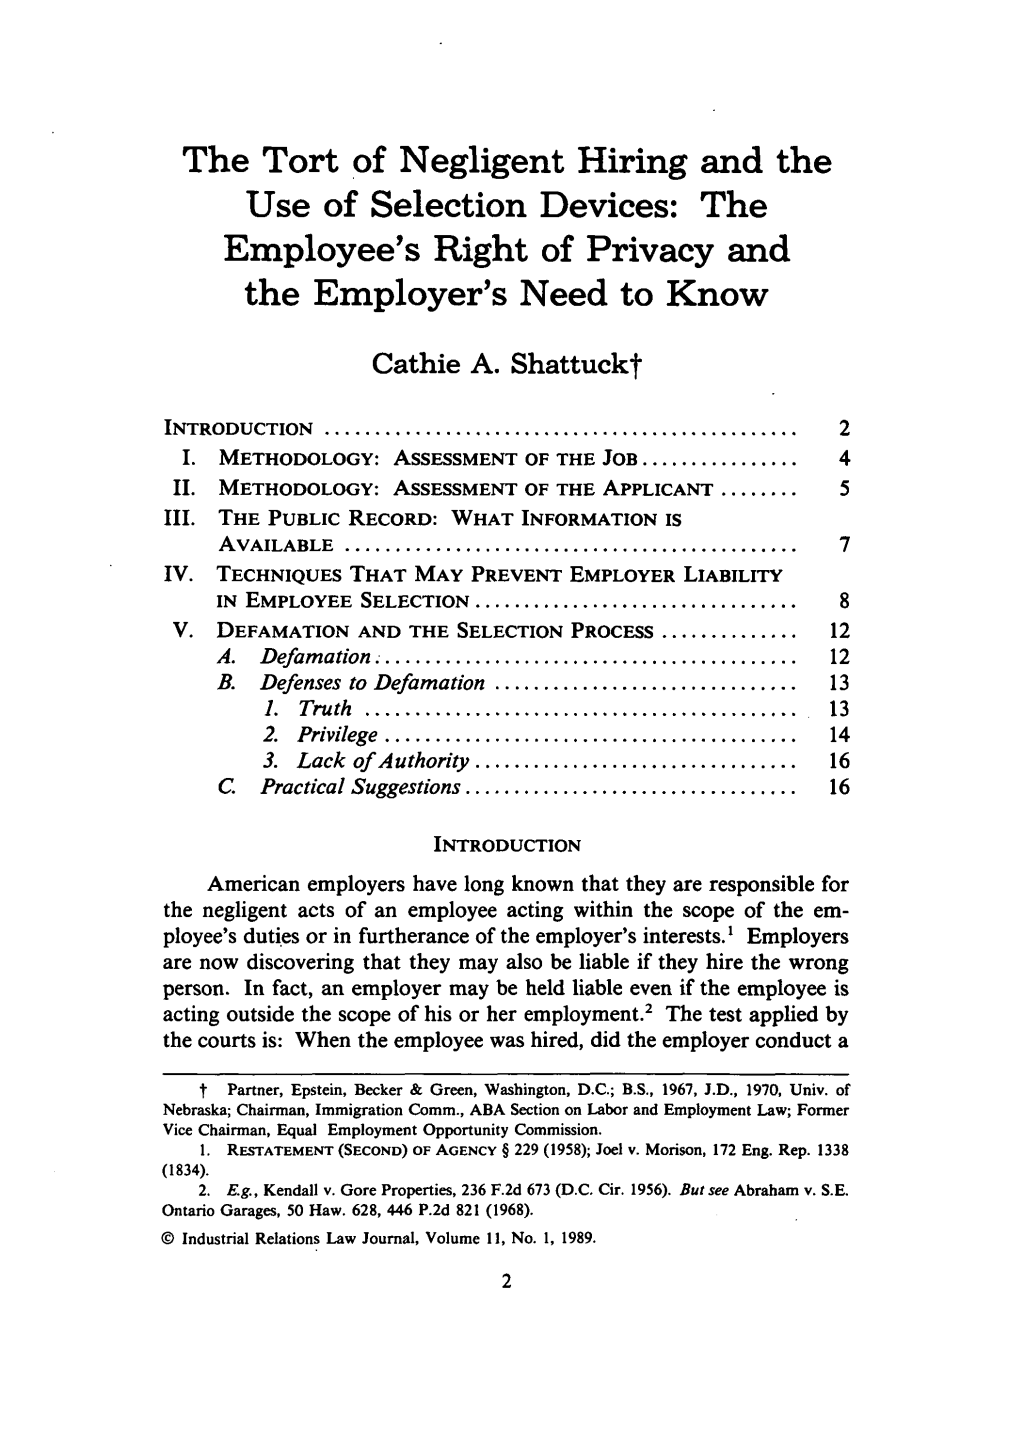 The Tort of Negligent Hiring and the Use of Selection Devices: the Employee's Right of Privacy and the Employer's Need to Know